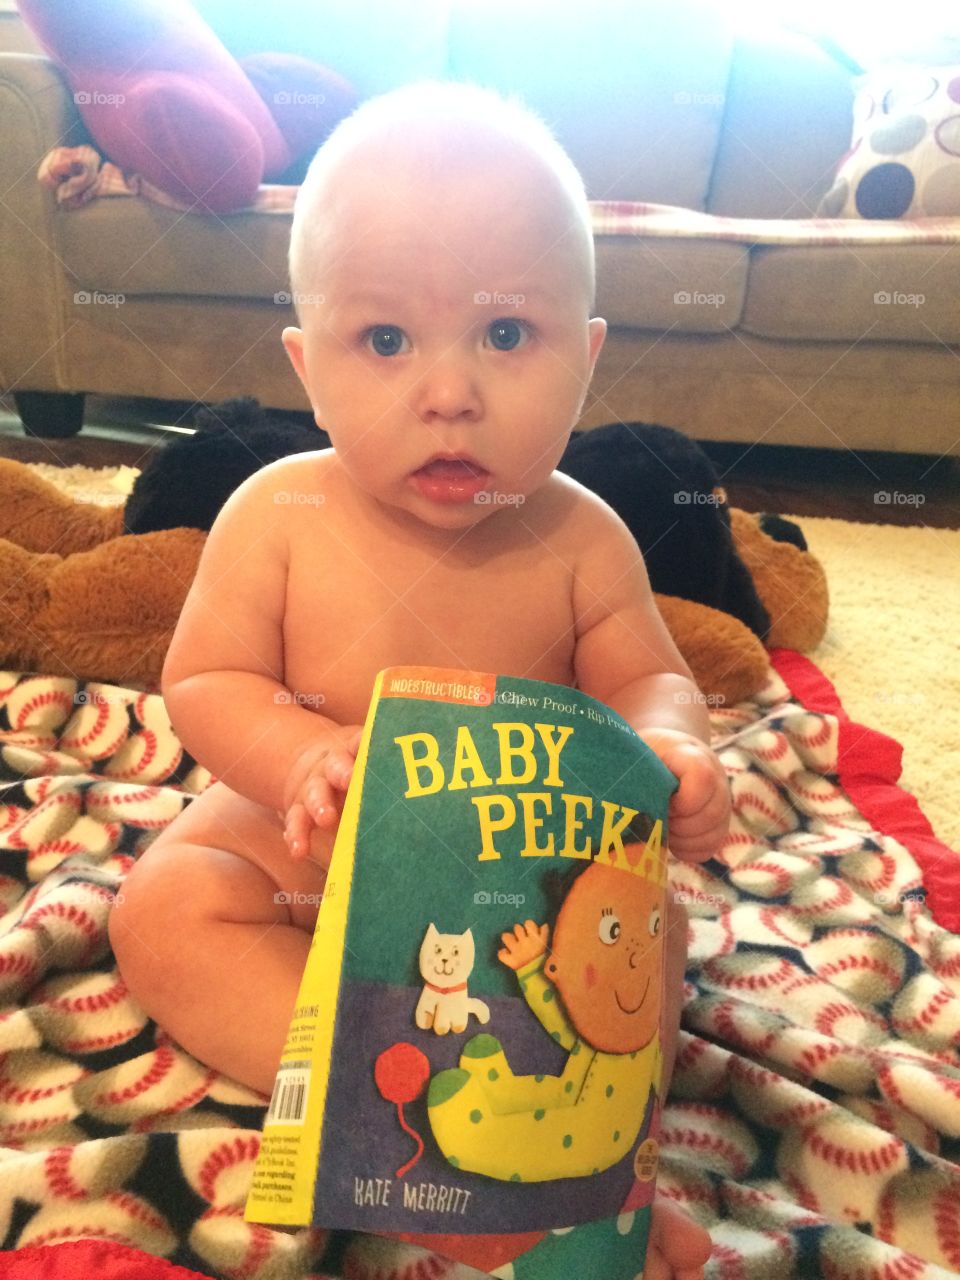 Baby caught eating his book! 